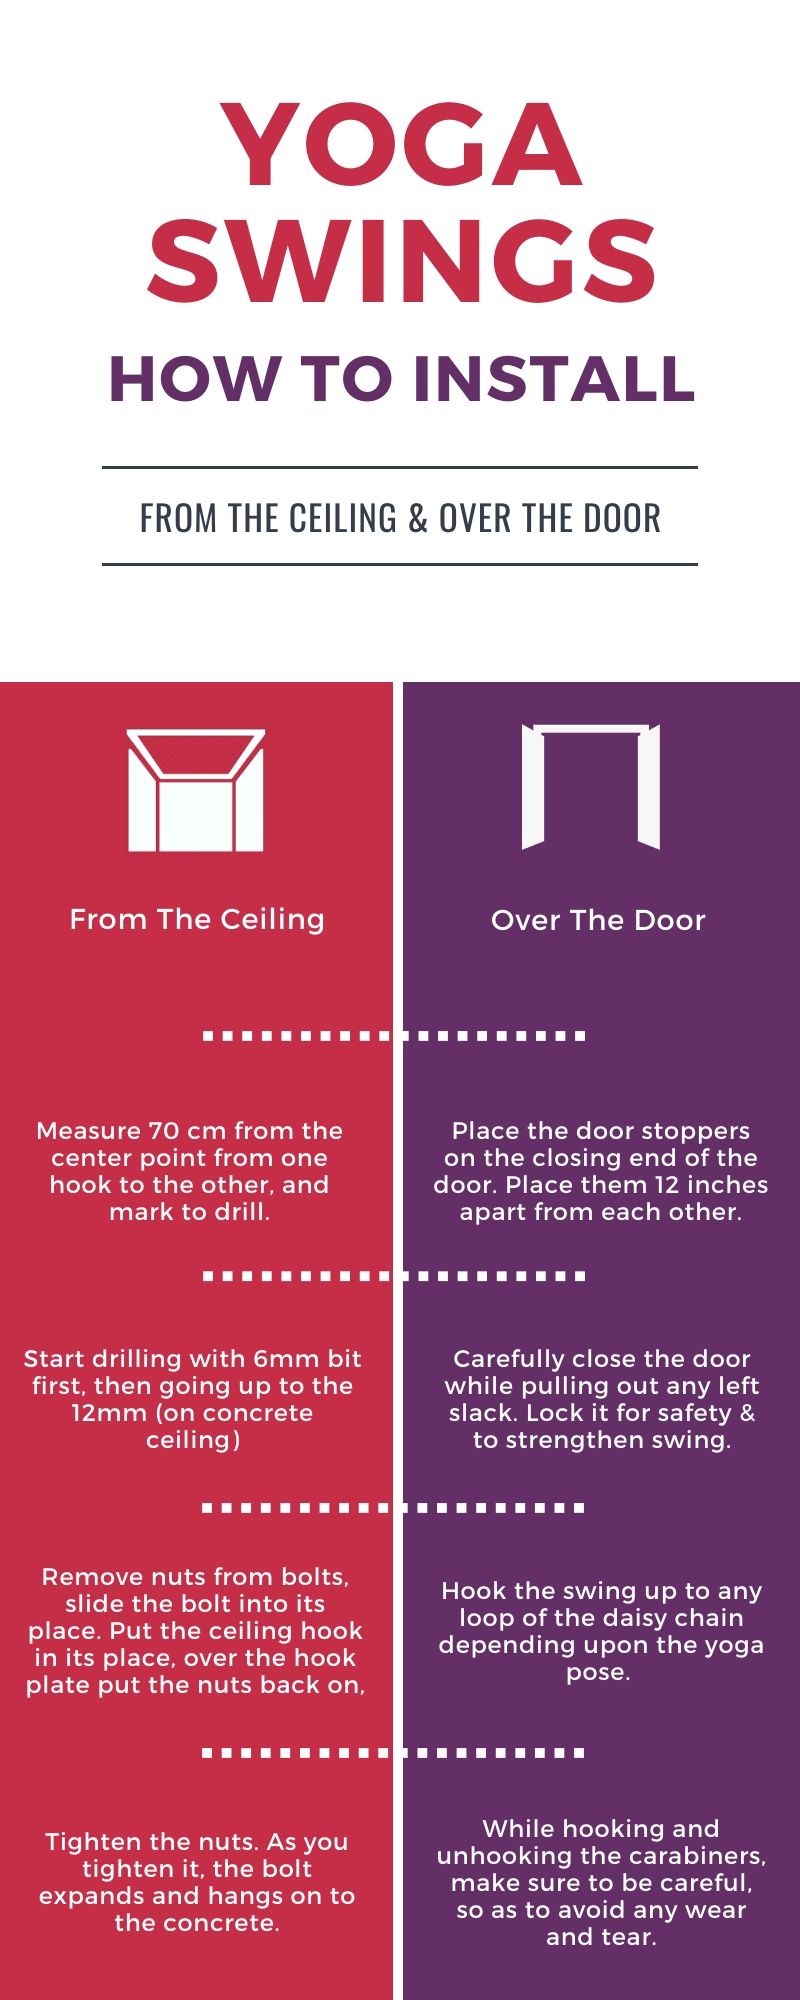 Infographic explaining the steps to Install Yoga swing from ceiling and door